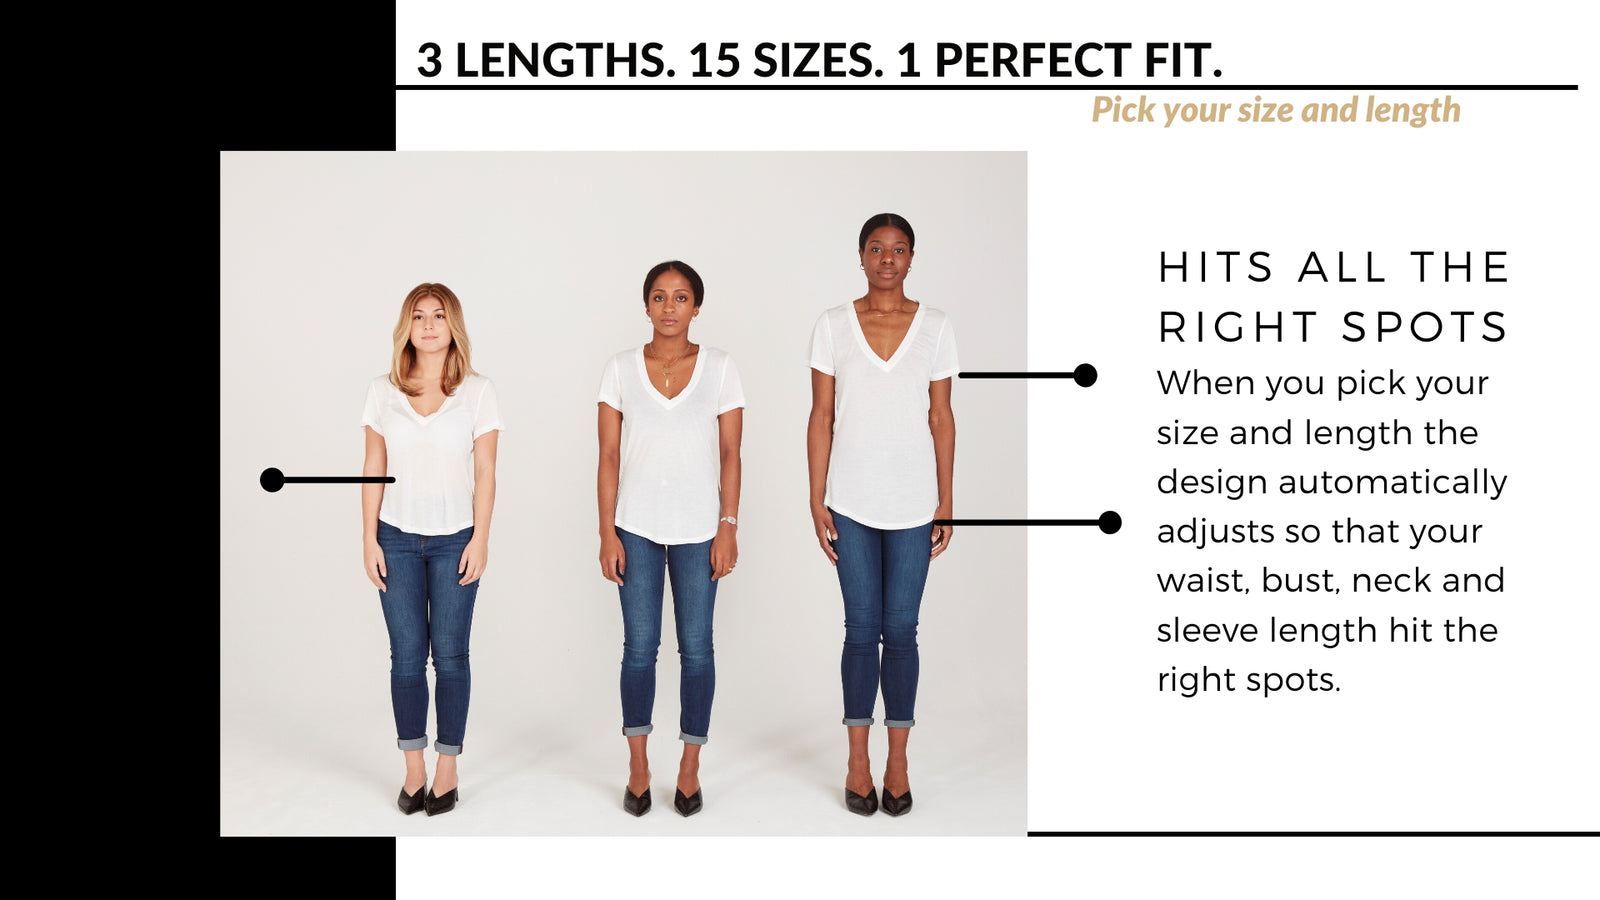 I LOVE TALL - fashion for tall people. Women's Size Guide